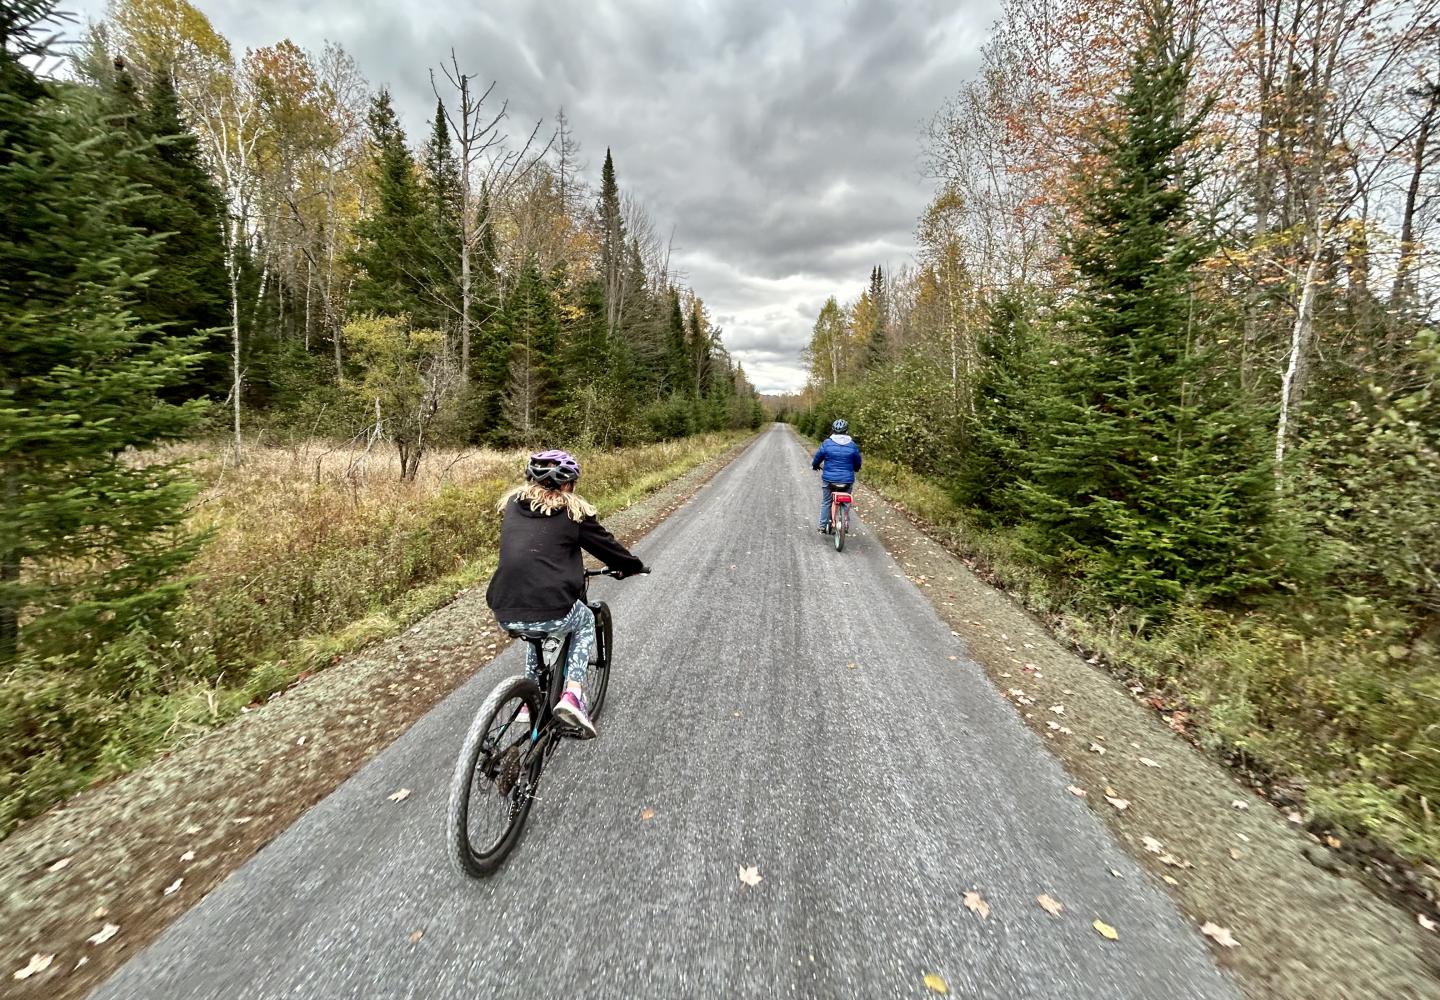 Phase 1 of the Adirondack Rail Trail is now open between Lake Placid and Saranac Lake.